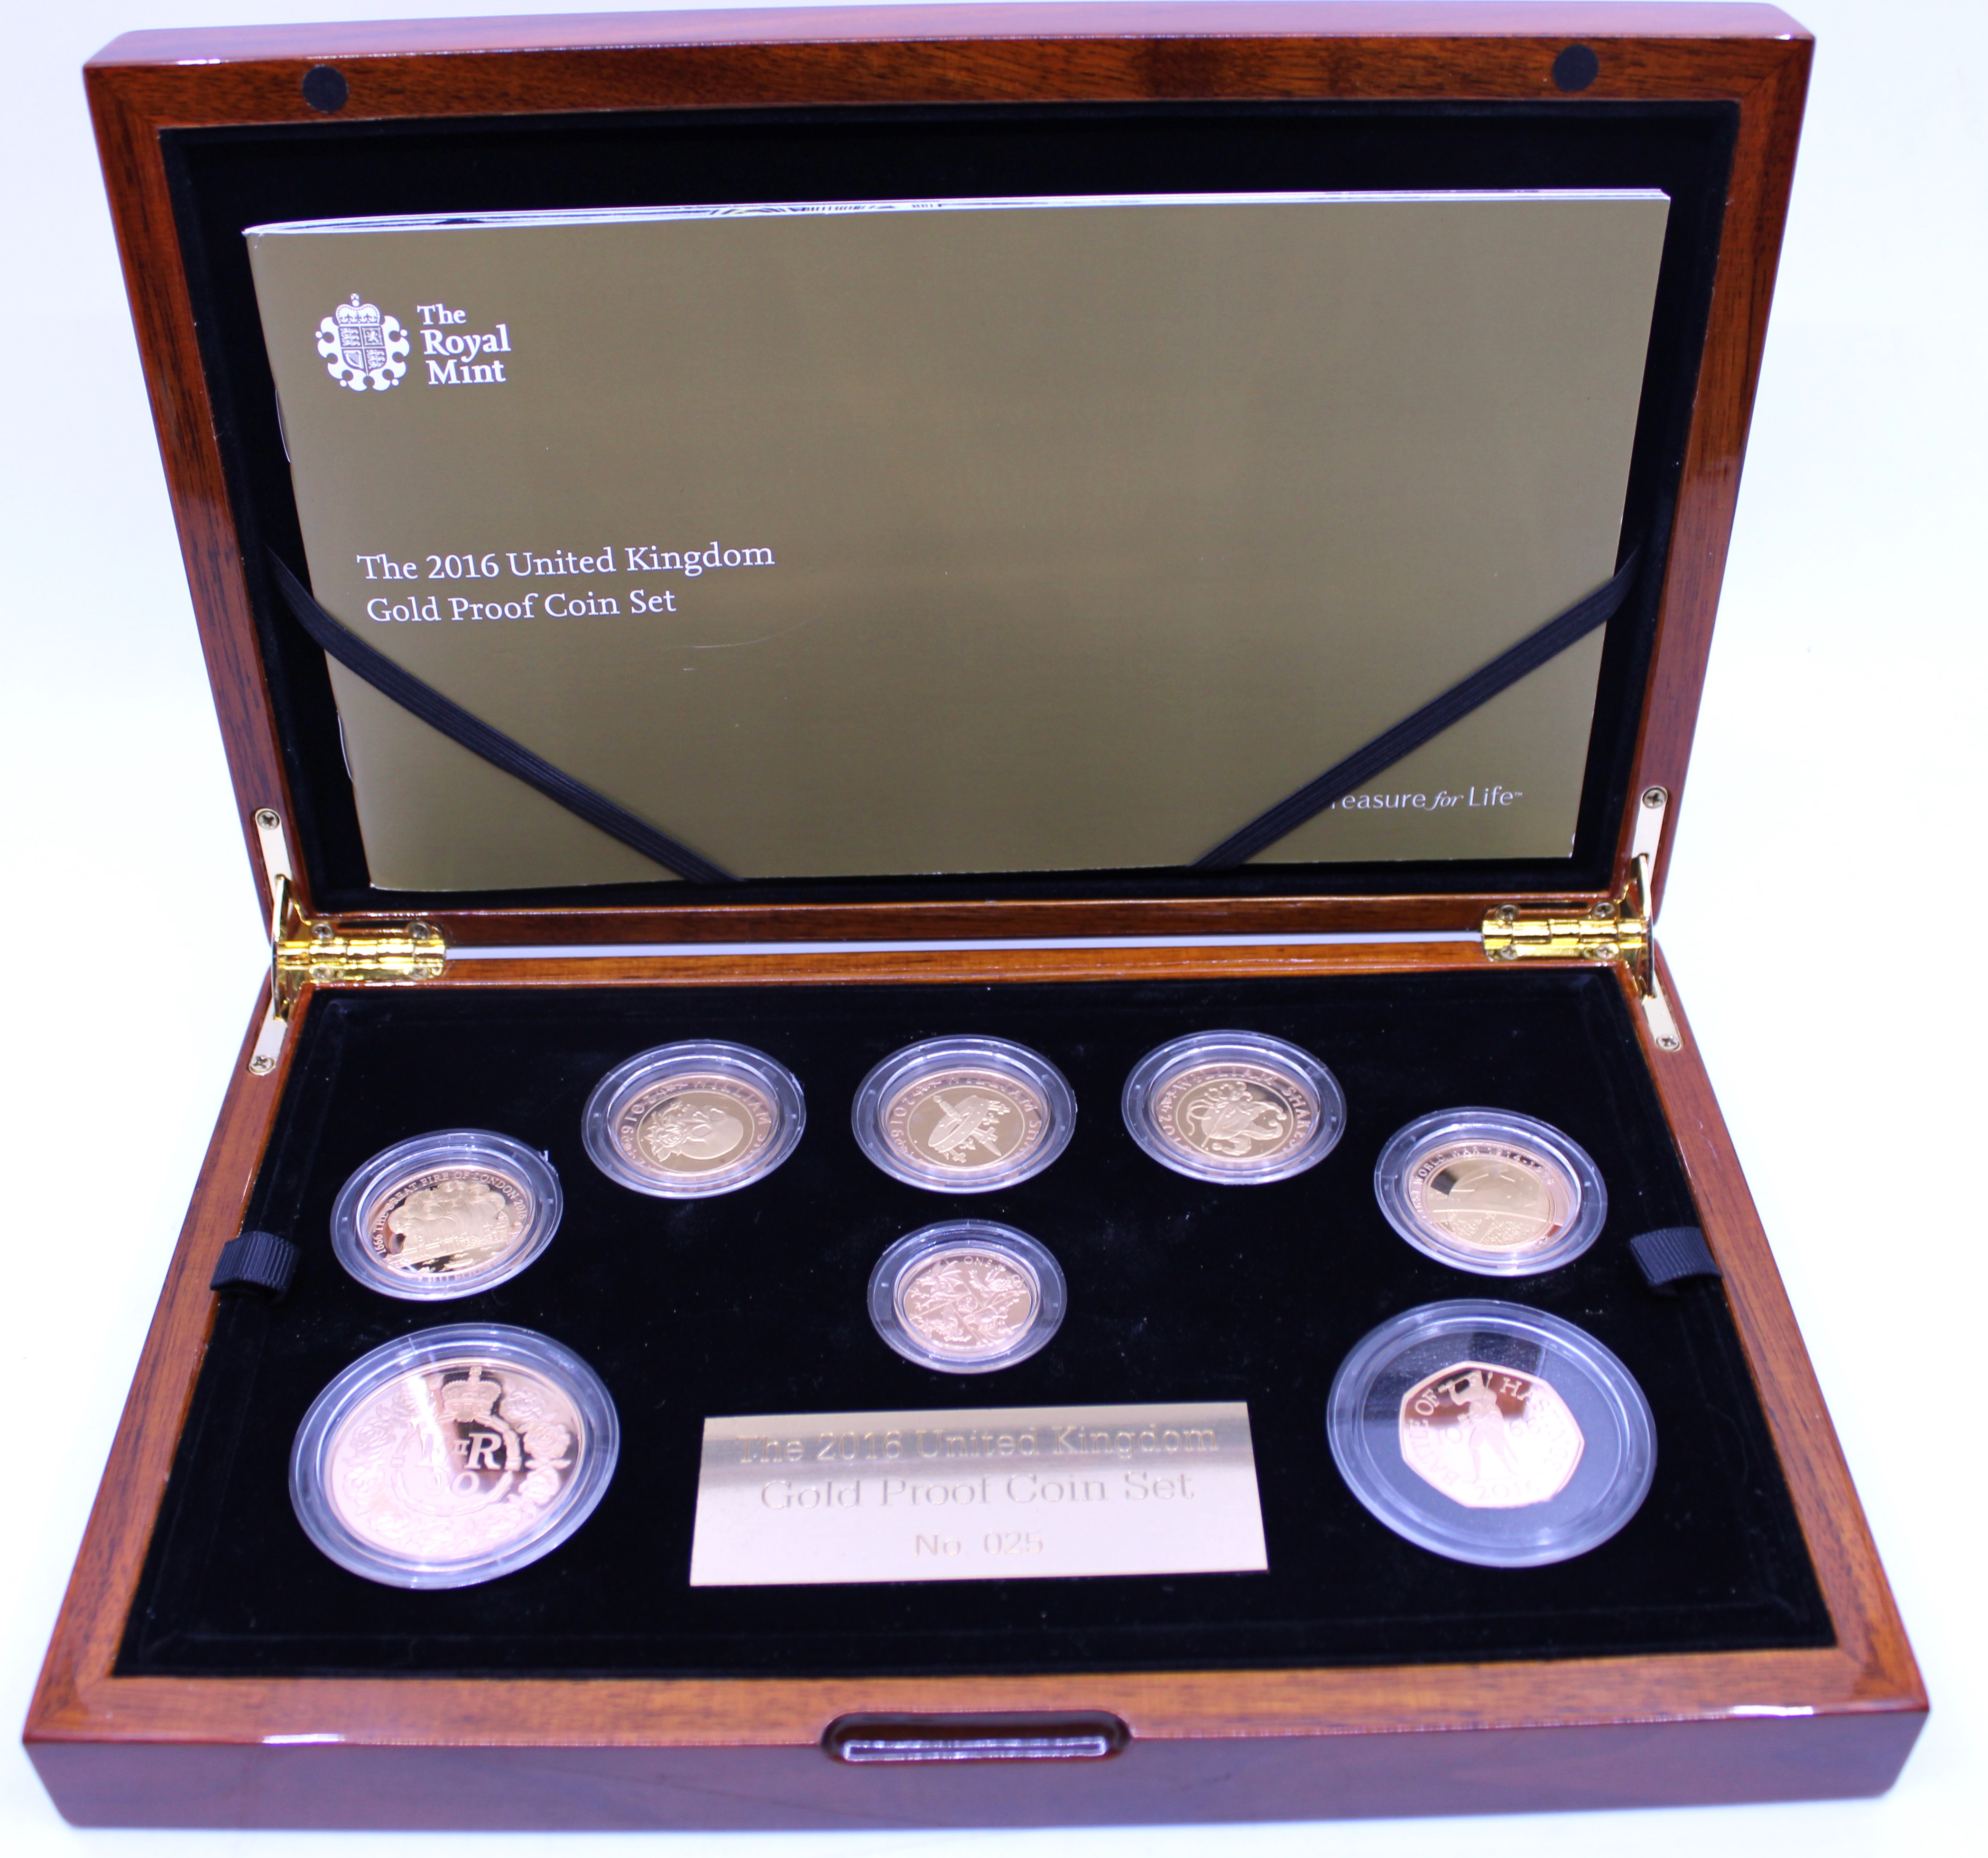 2016 UK Gold Proof Annual Set from The Royal Mint with eight commemorative coins in original box.